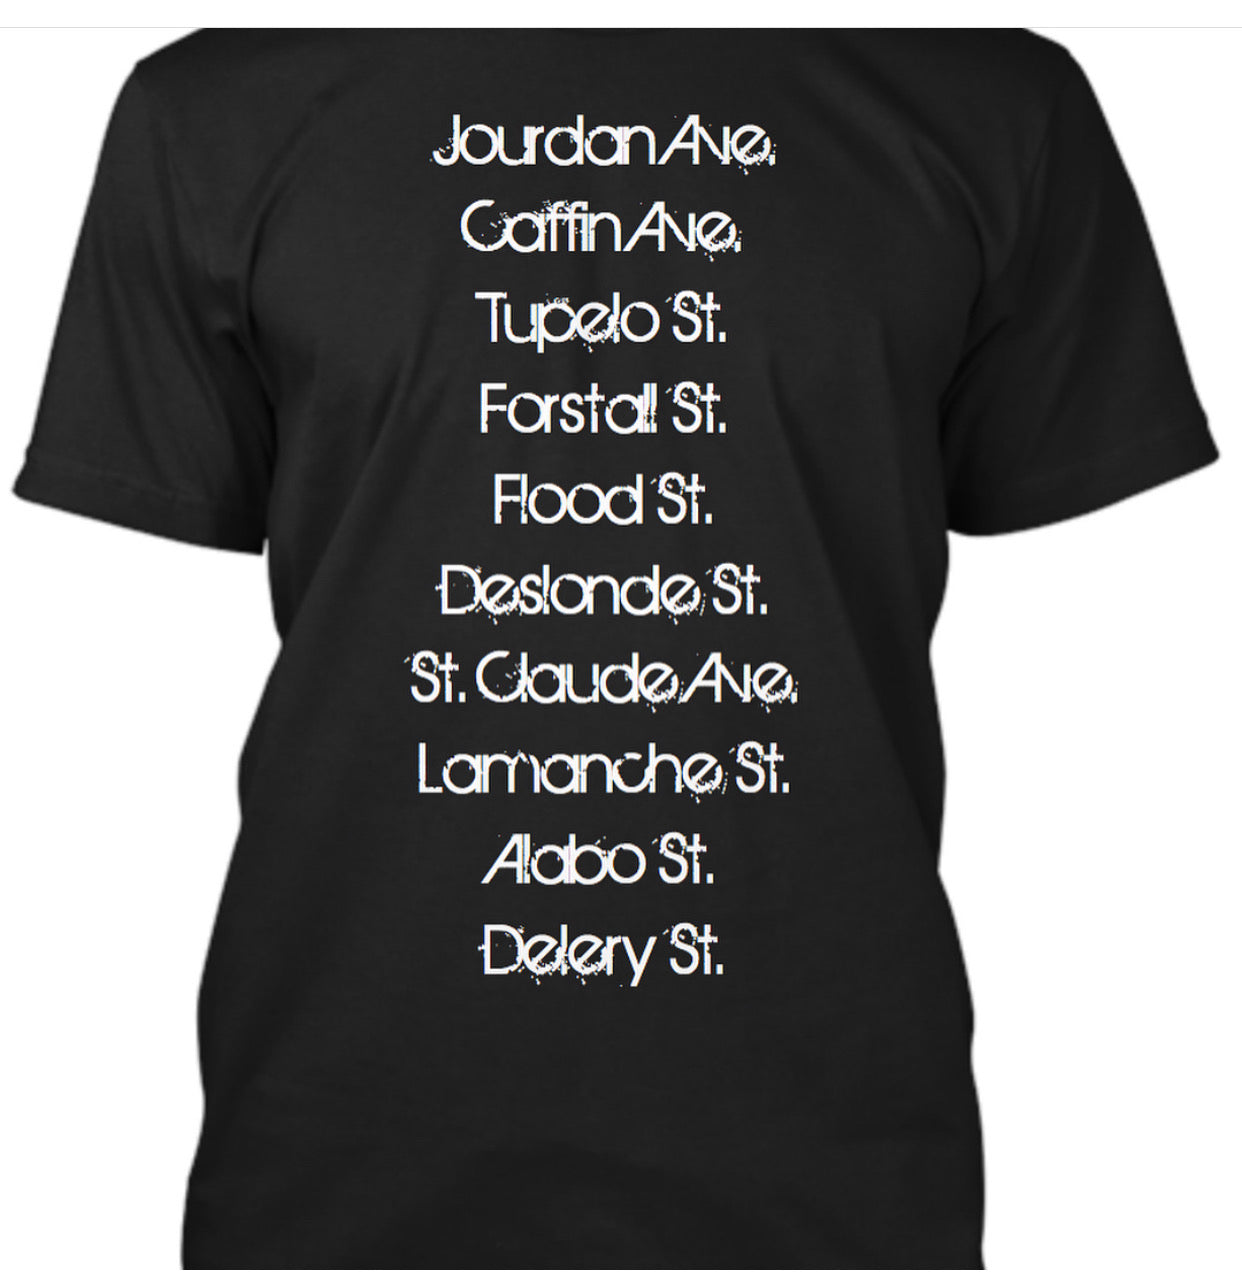 LOWER 9TH WARD "CTC" (1st Edition Men's T-shirt)